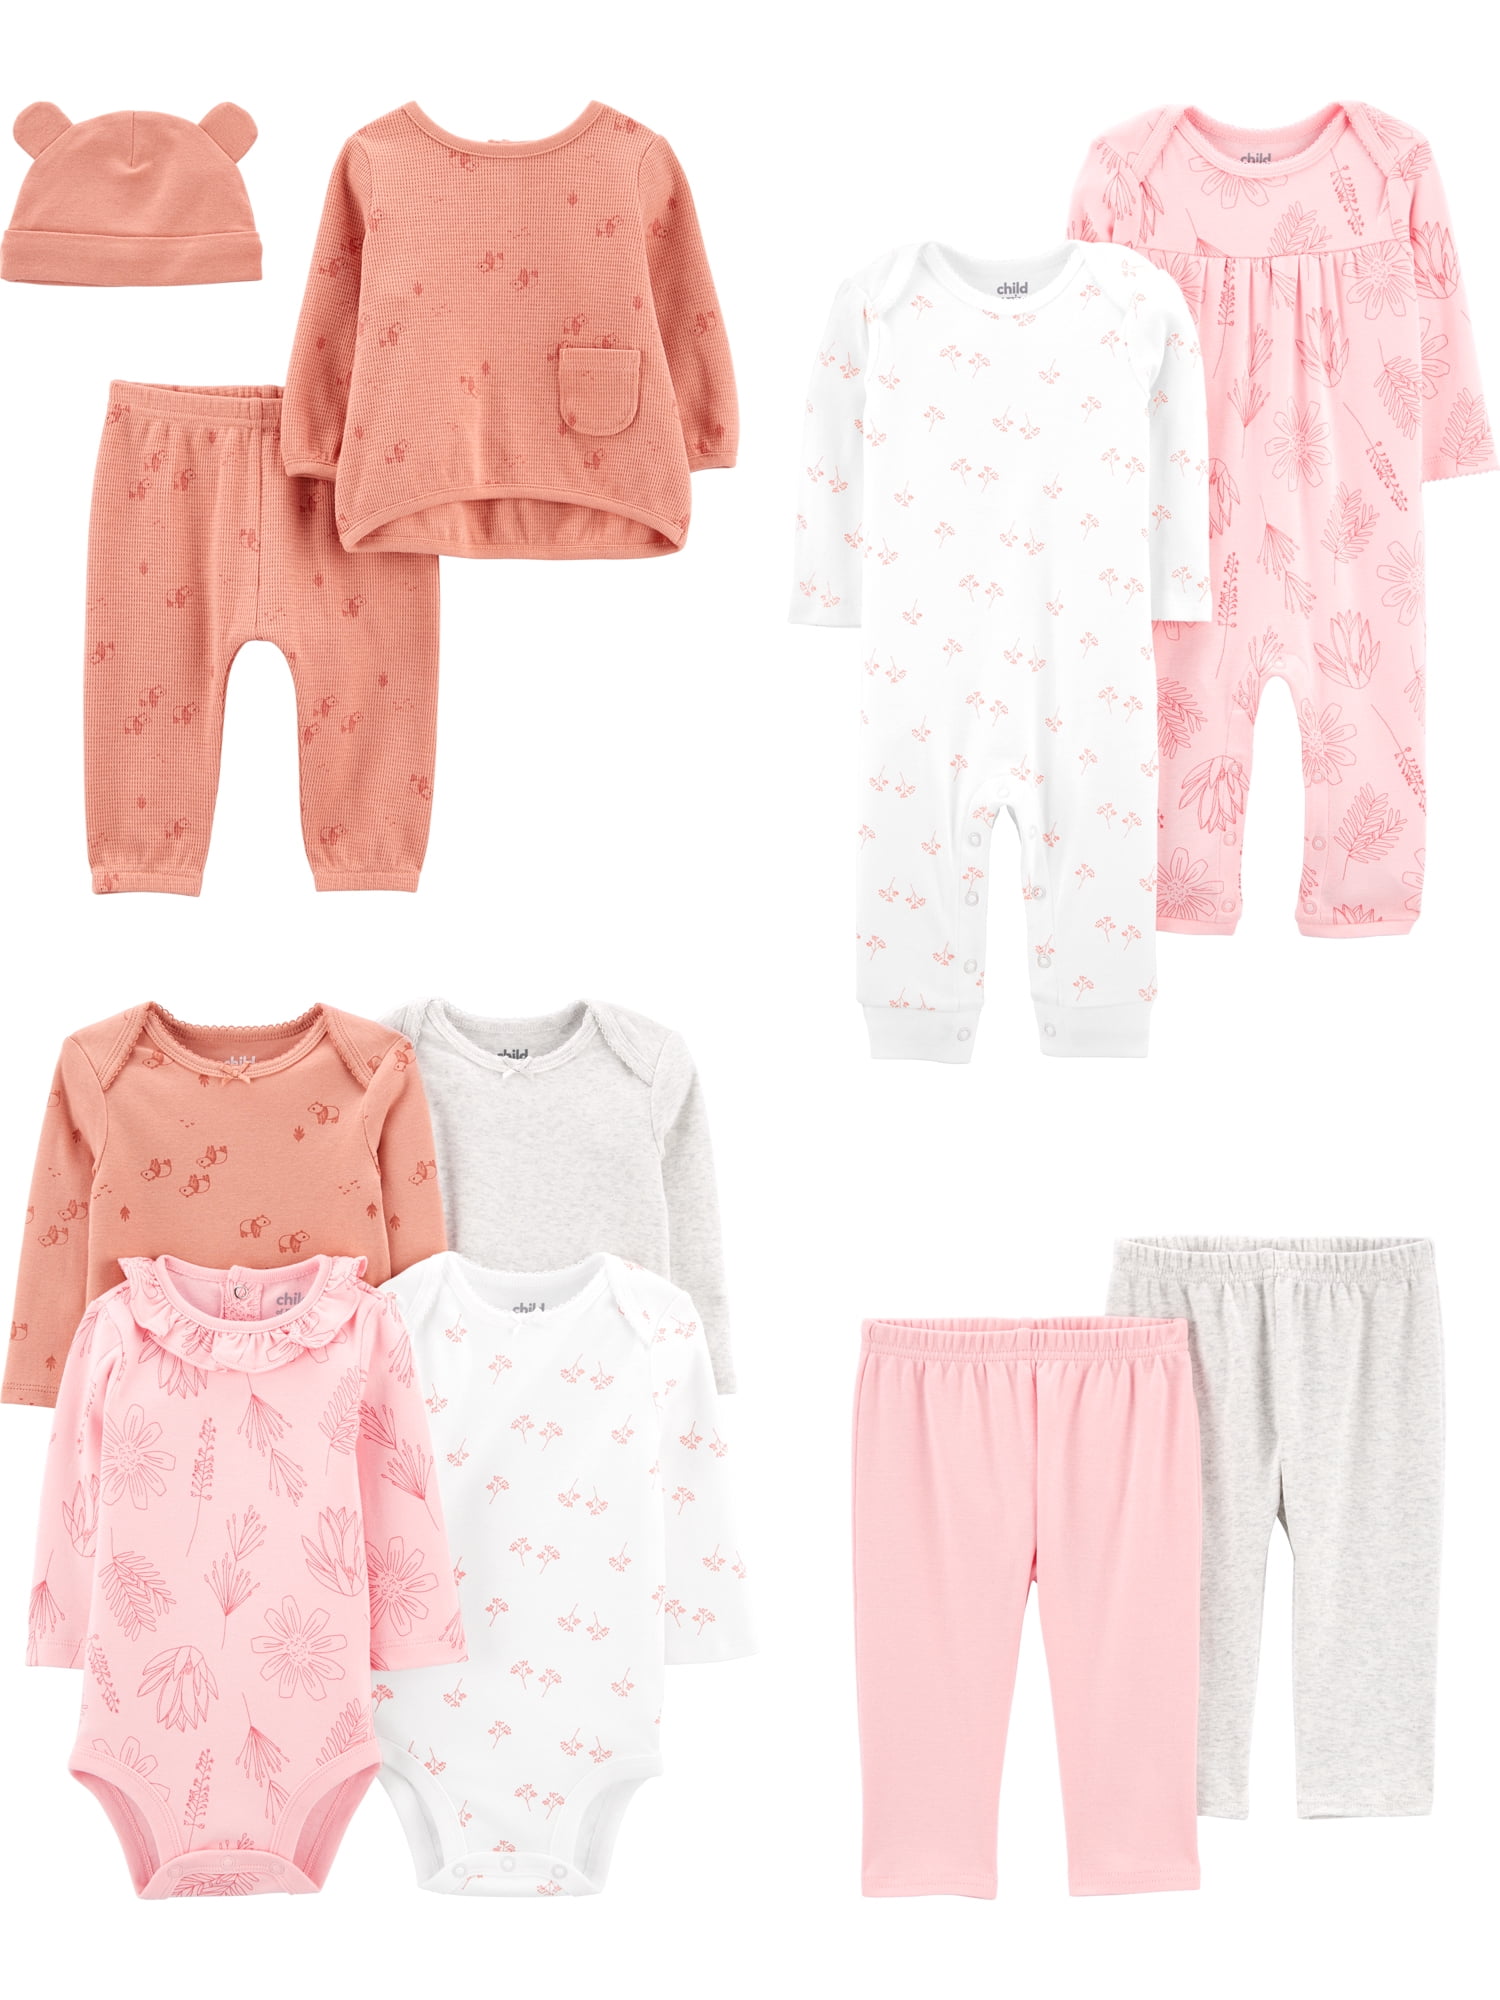 Newborn Baby Girl Coming Home Outfit Set | Baby Be Mine